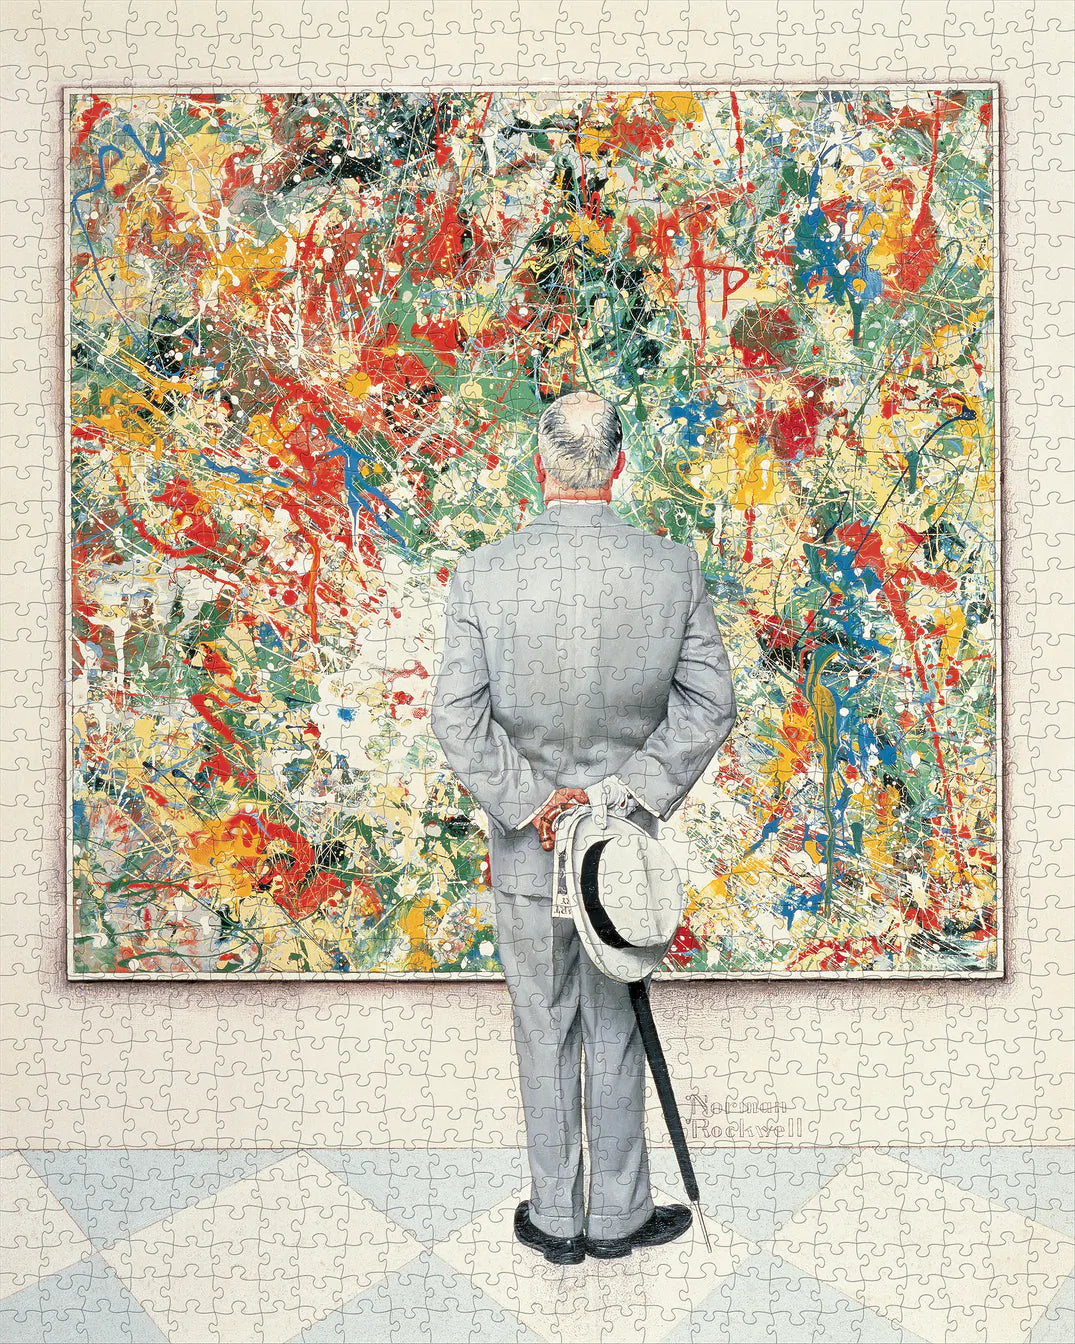 Norman Rockwell: The Connoisseur 1,000-Piece Puzzle